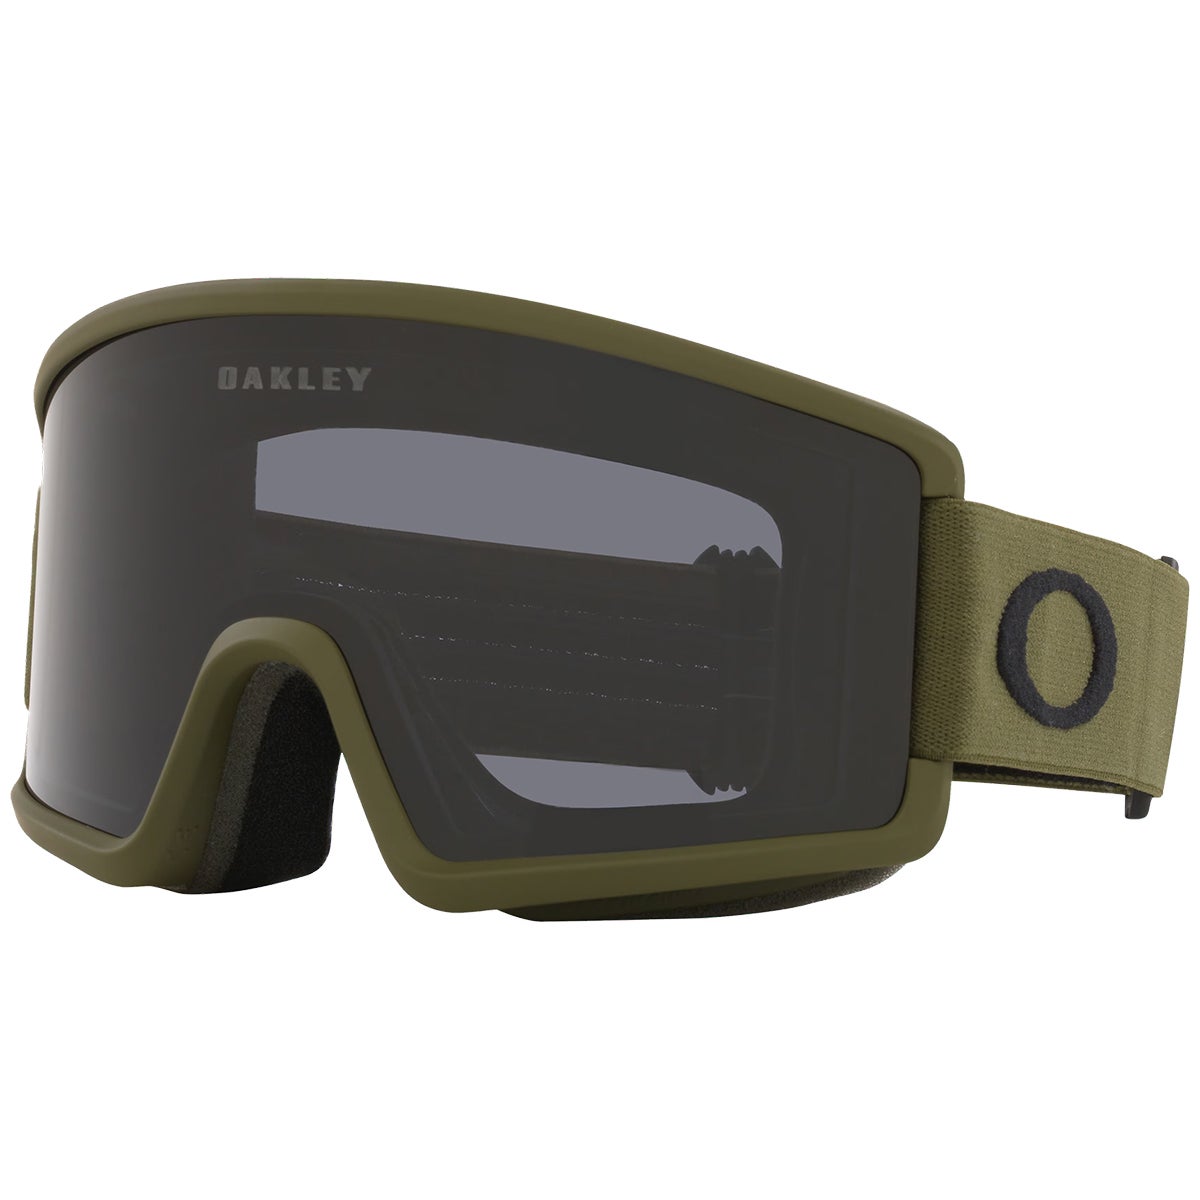 Men's Snowboard Goggles | Boardertown - Free Freight / 90 Day Returns